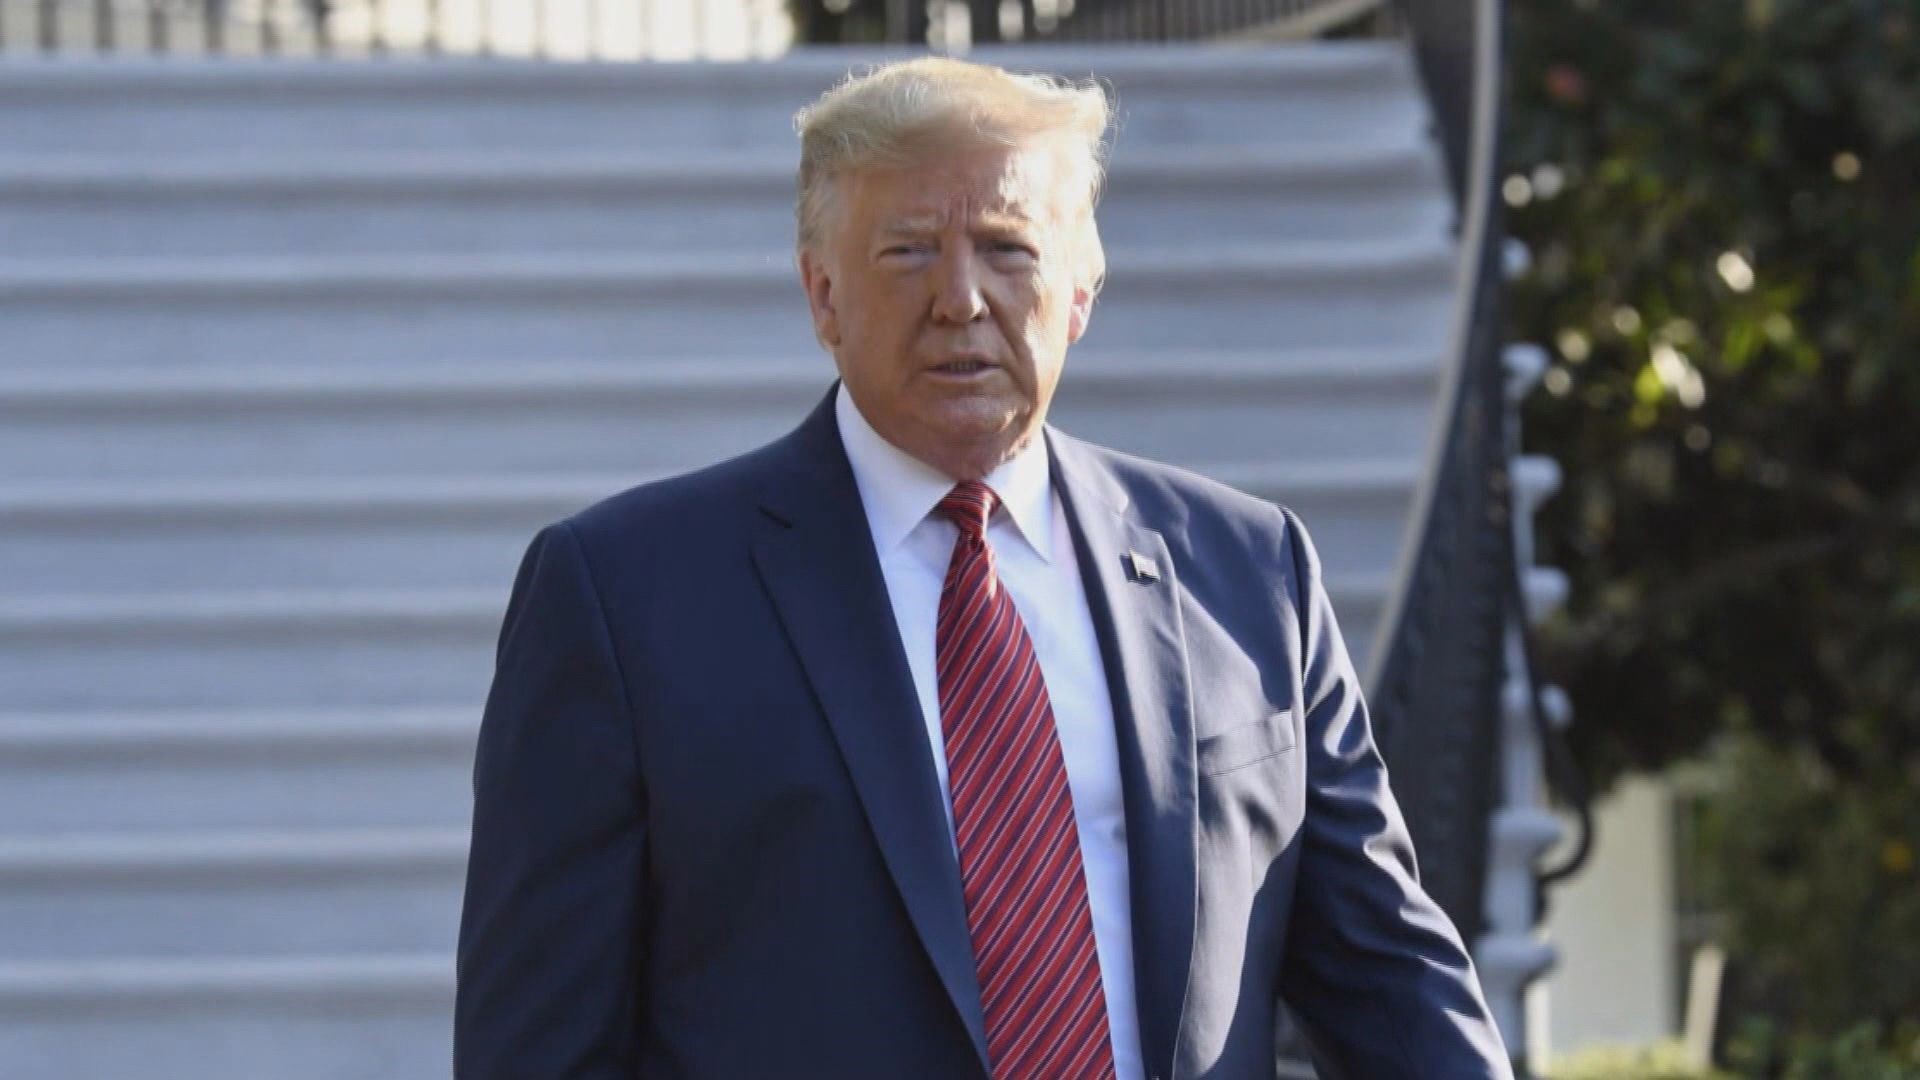 President Donald Trump paid a surprise Thanksgiving visit to Afghanistan, where he announced the U.S. and Taliban have been engaged in ongoing peace talks.